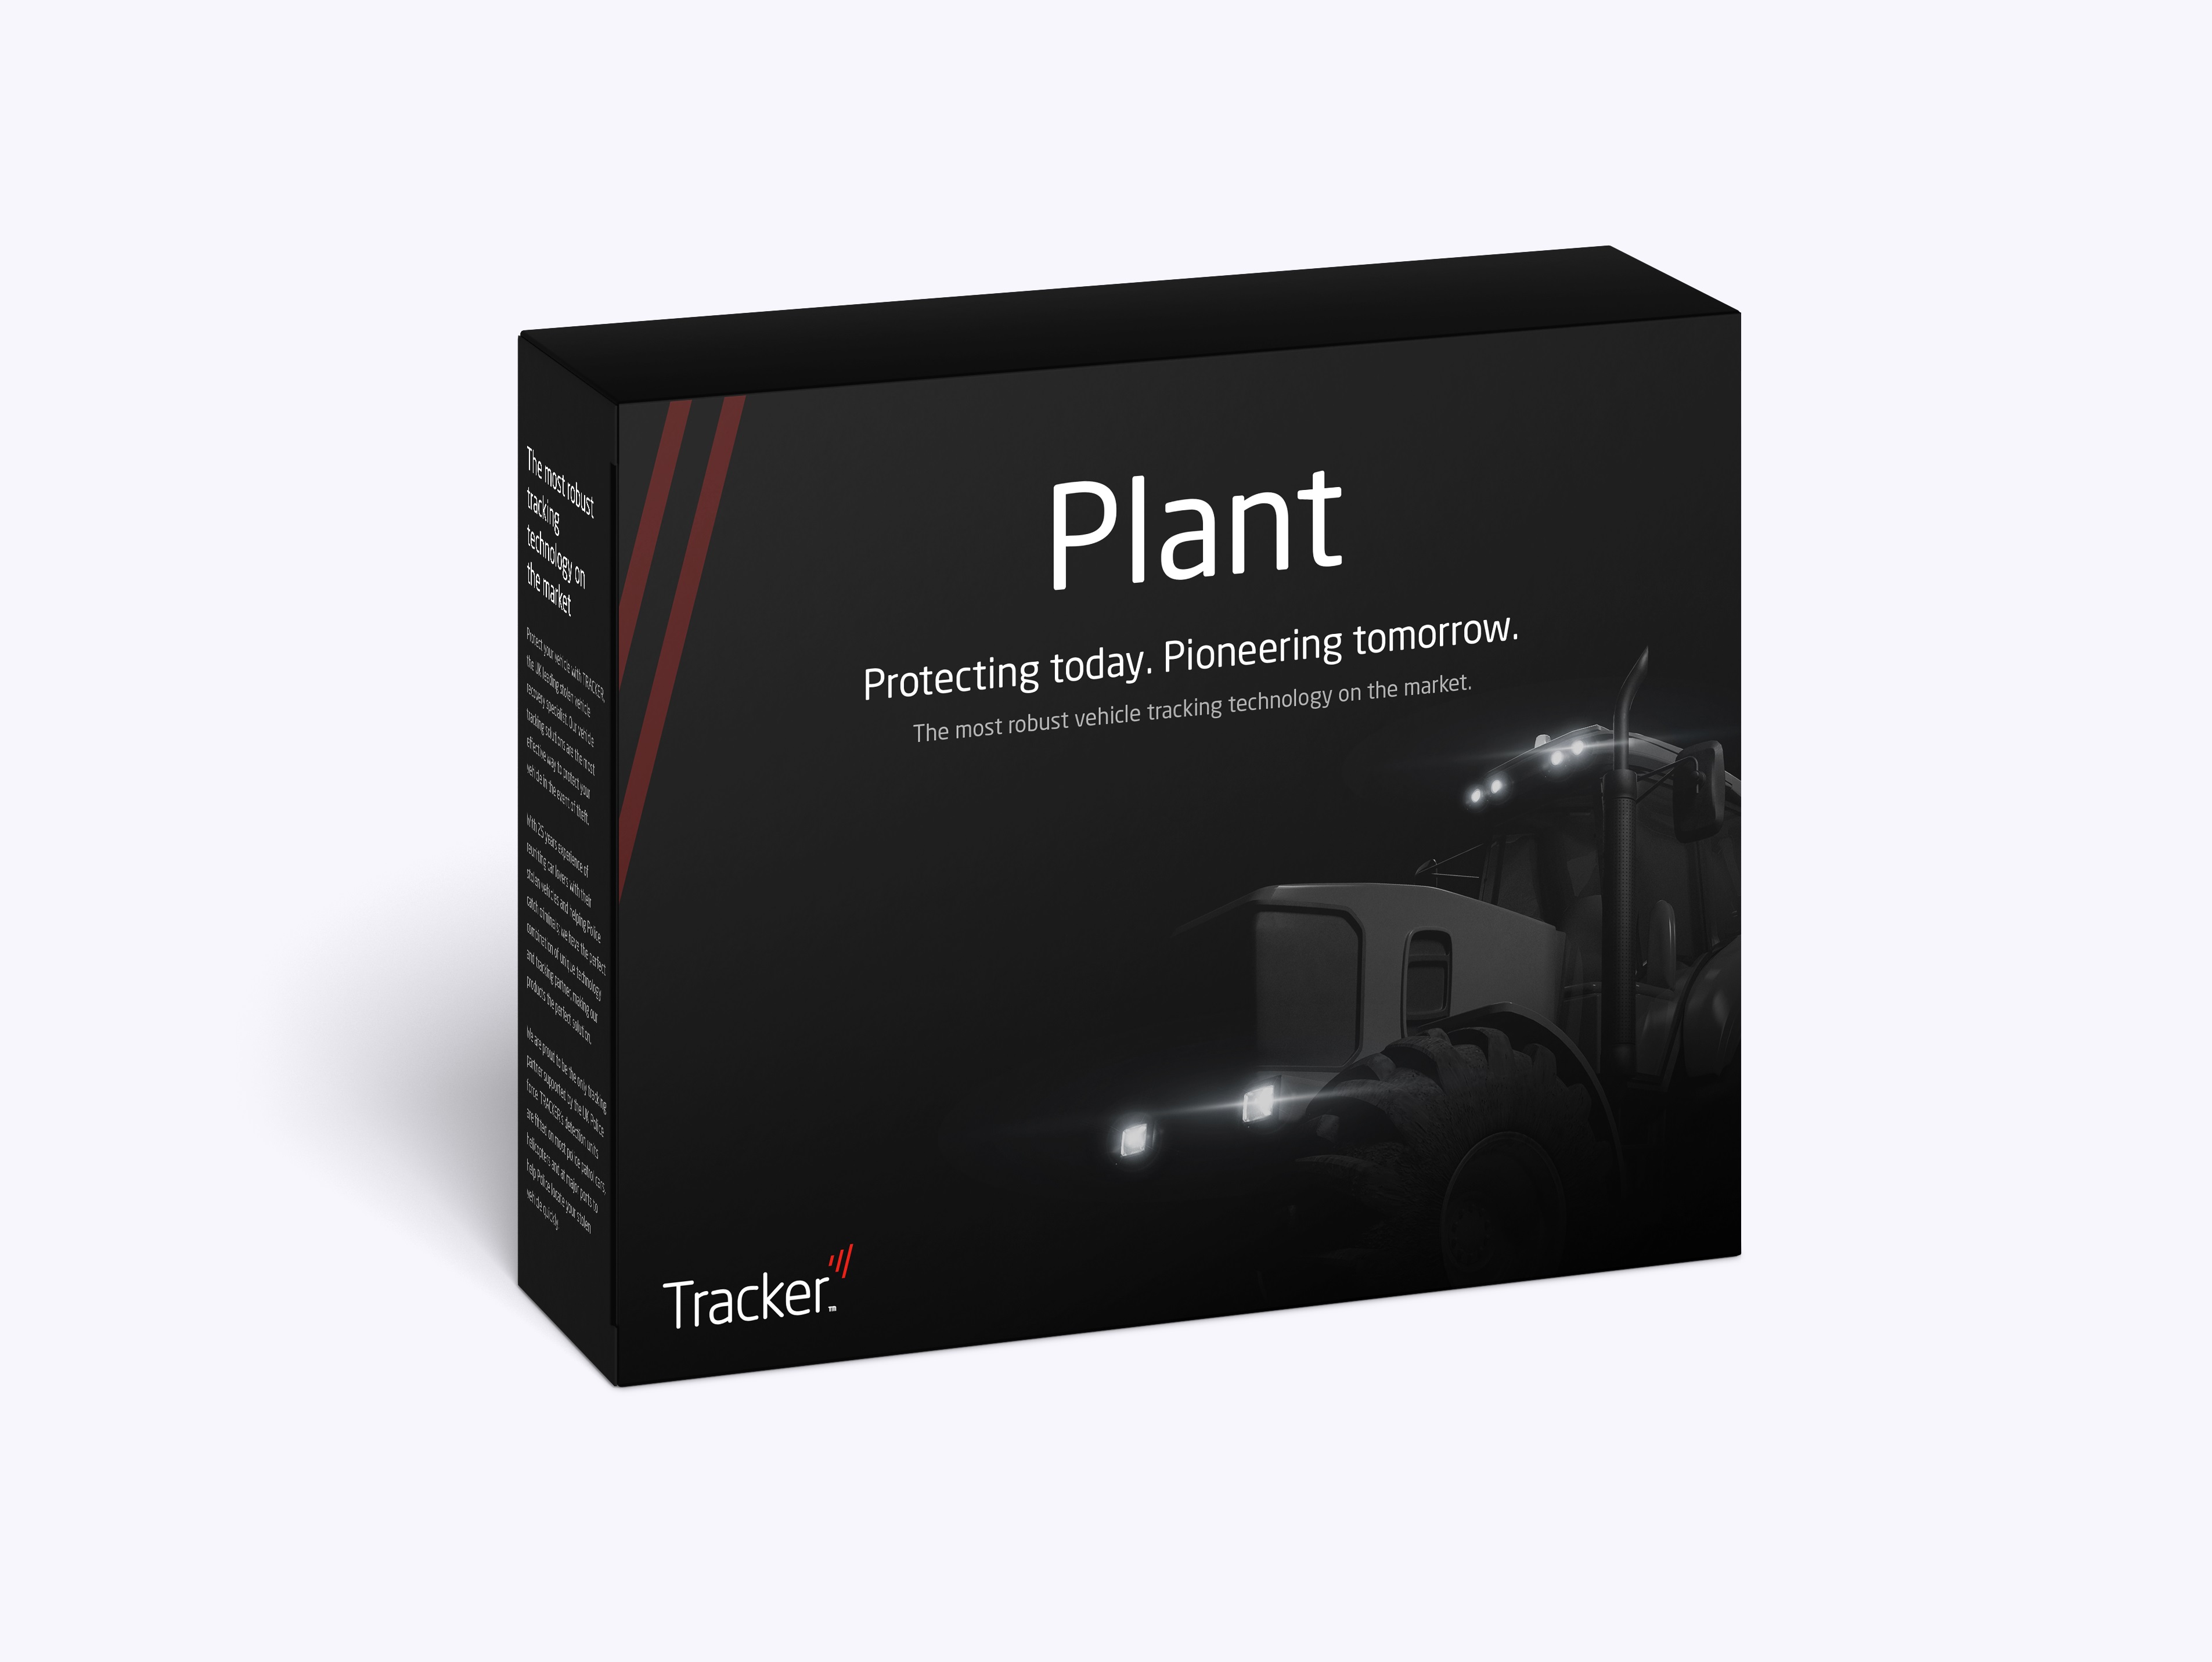 Plant packaging